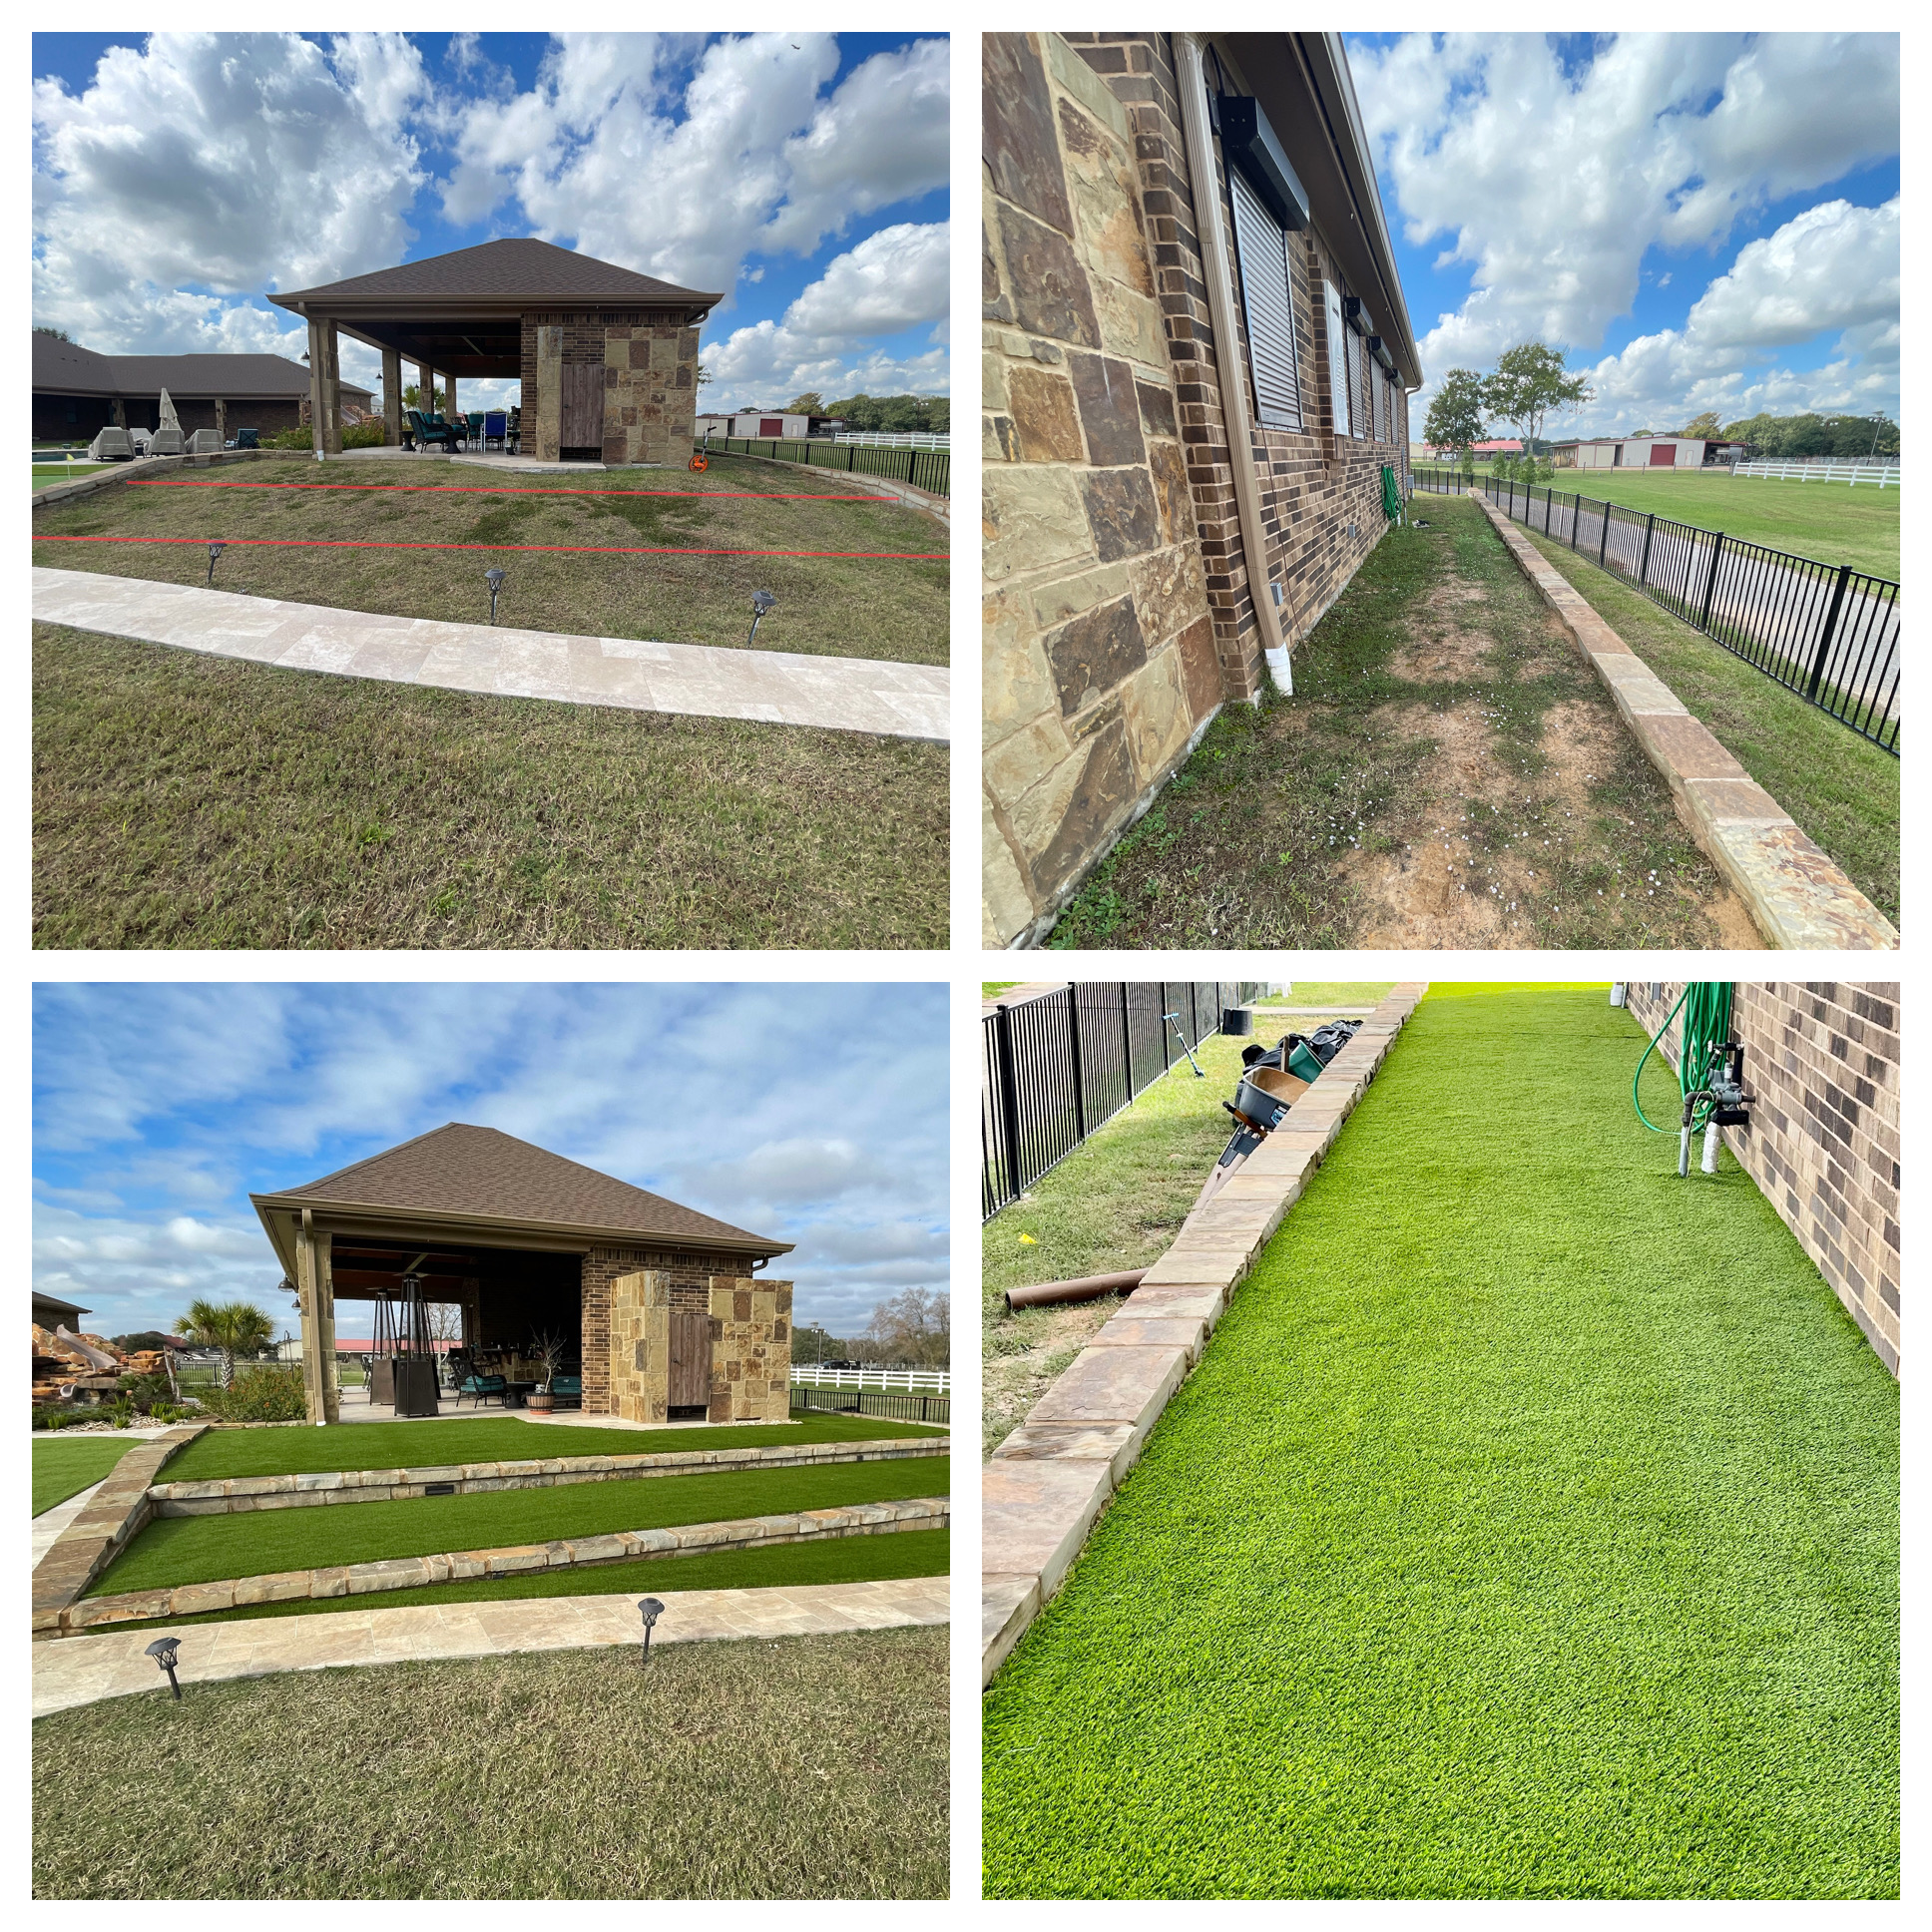 About Artificial Grass & Turf Installation